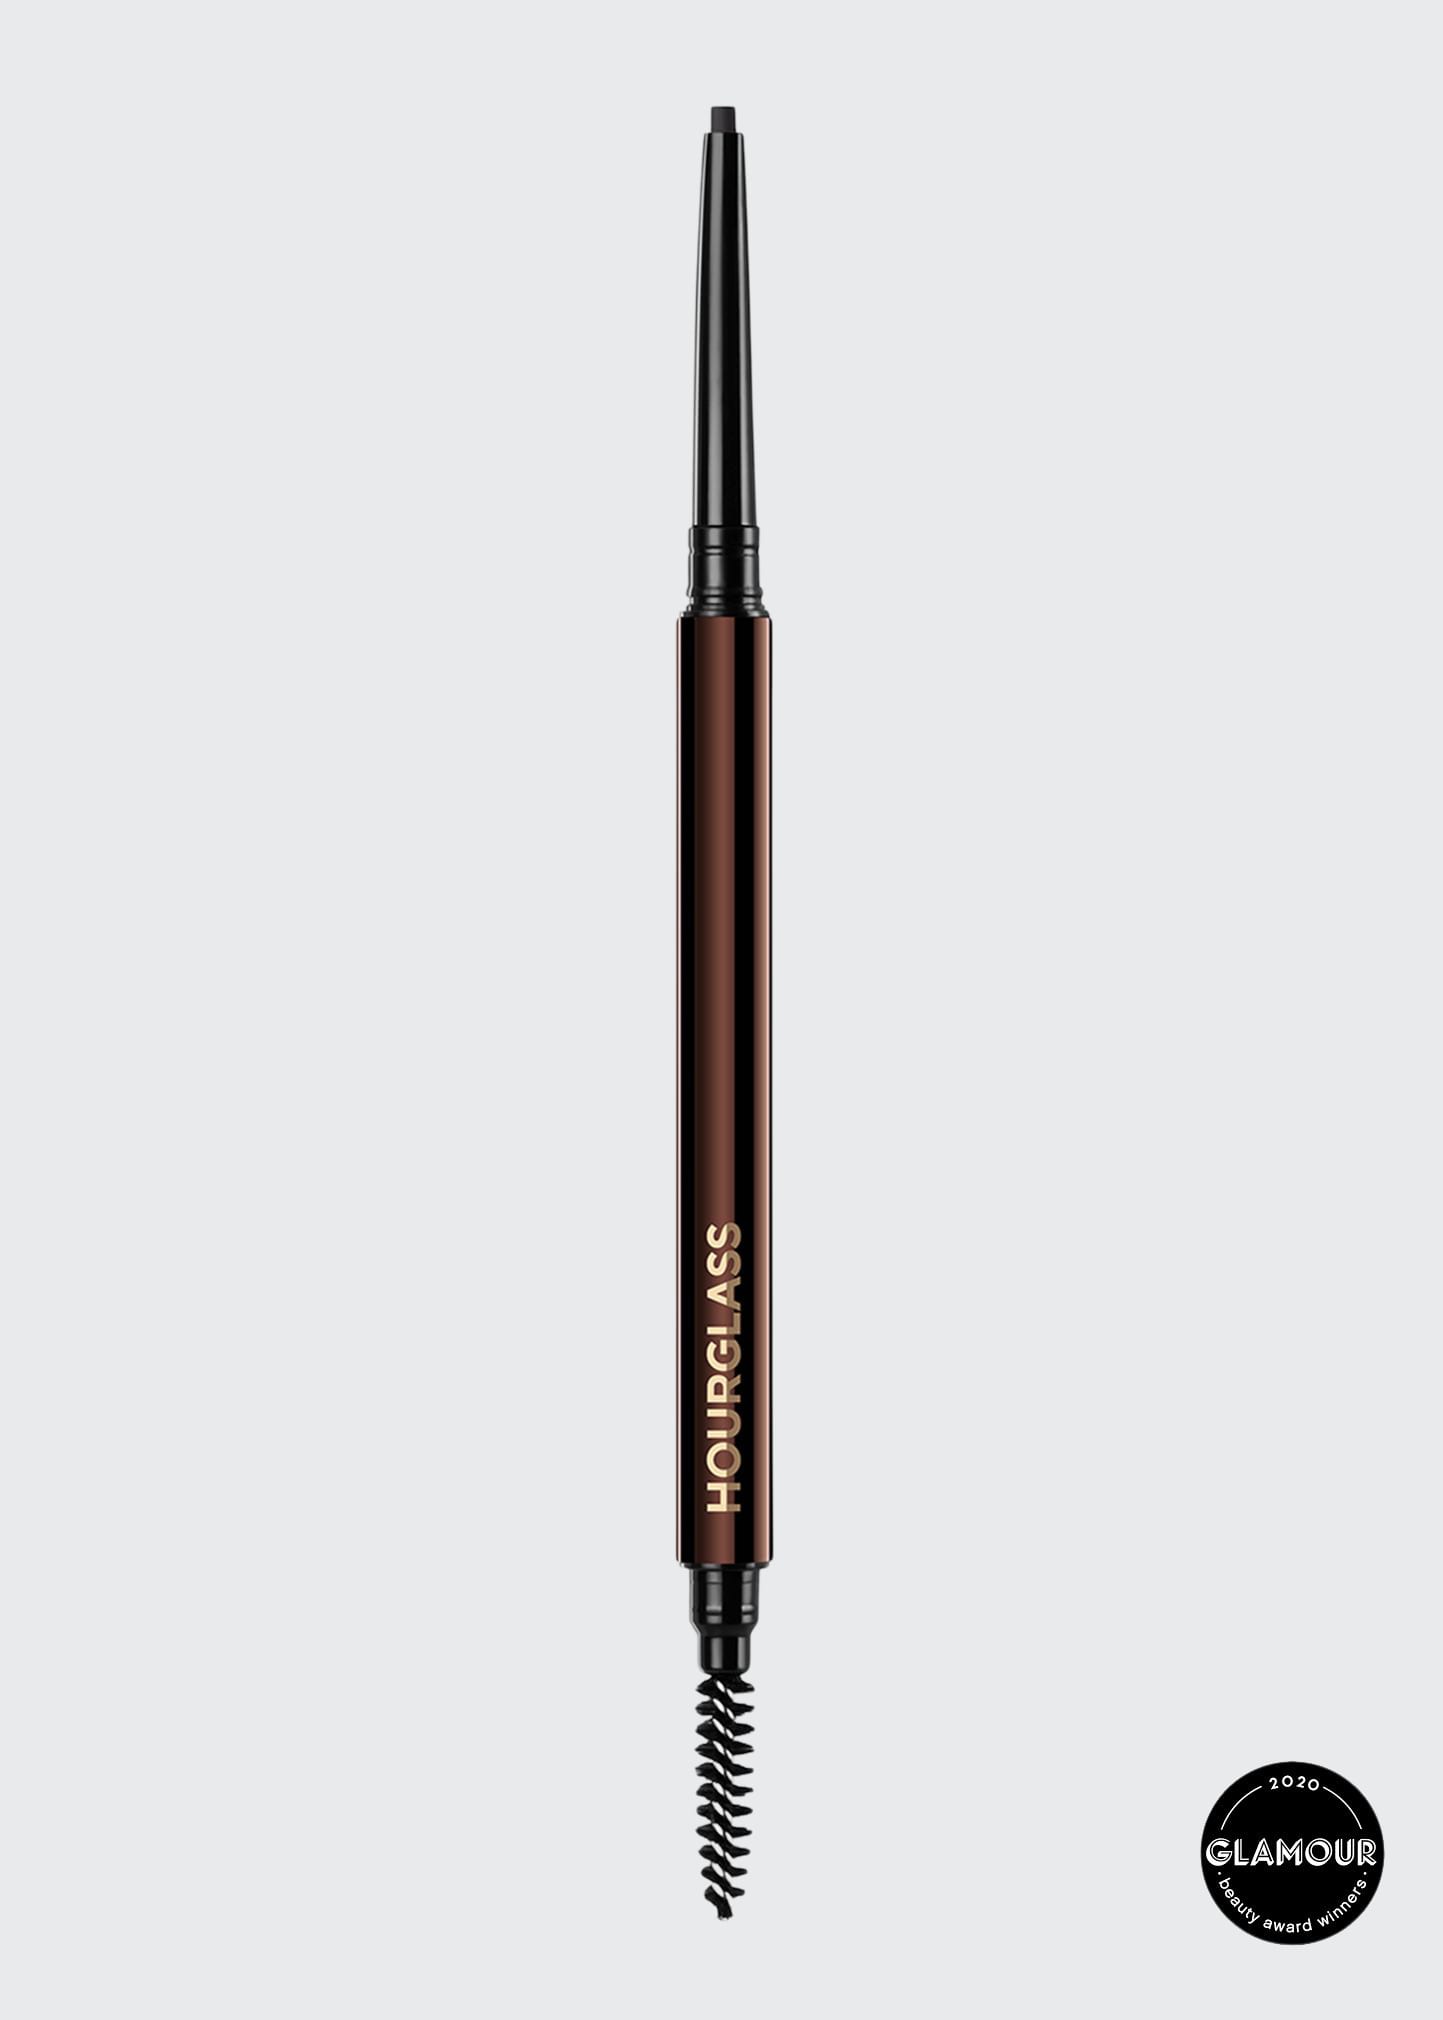 Hourglass Cosmetics Arch Brow Micro Sculpting Pencil